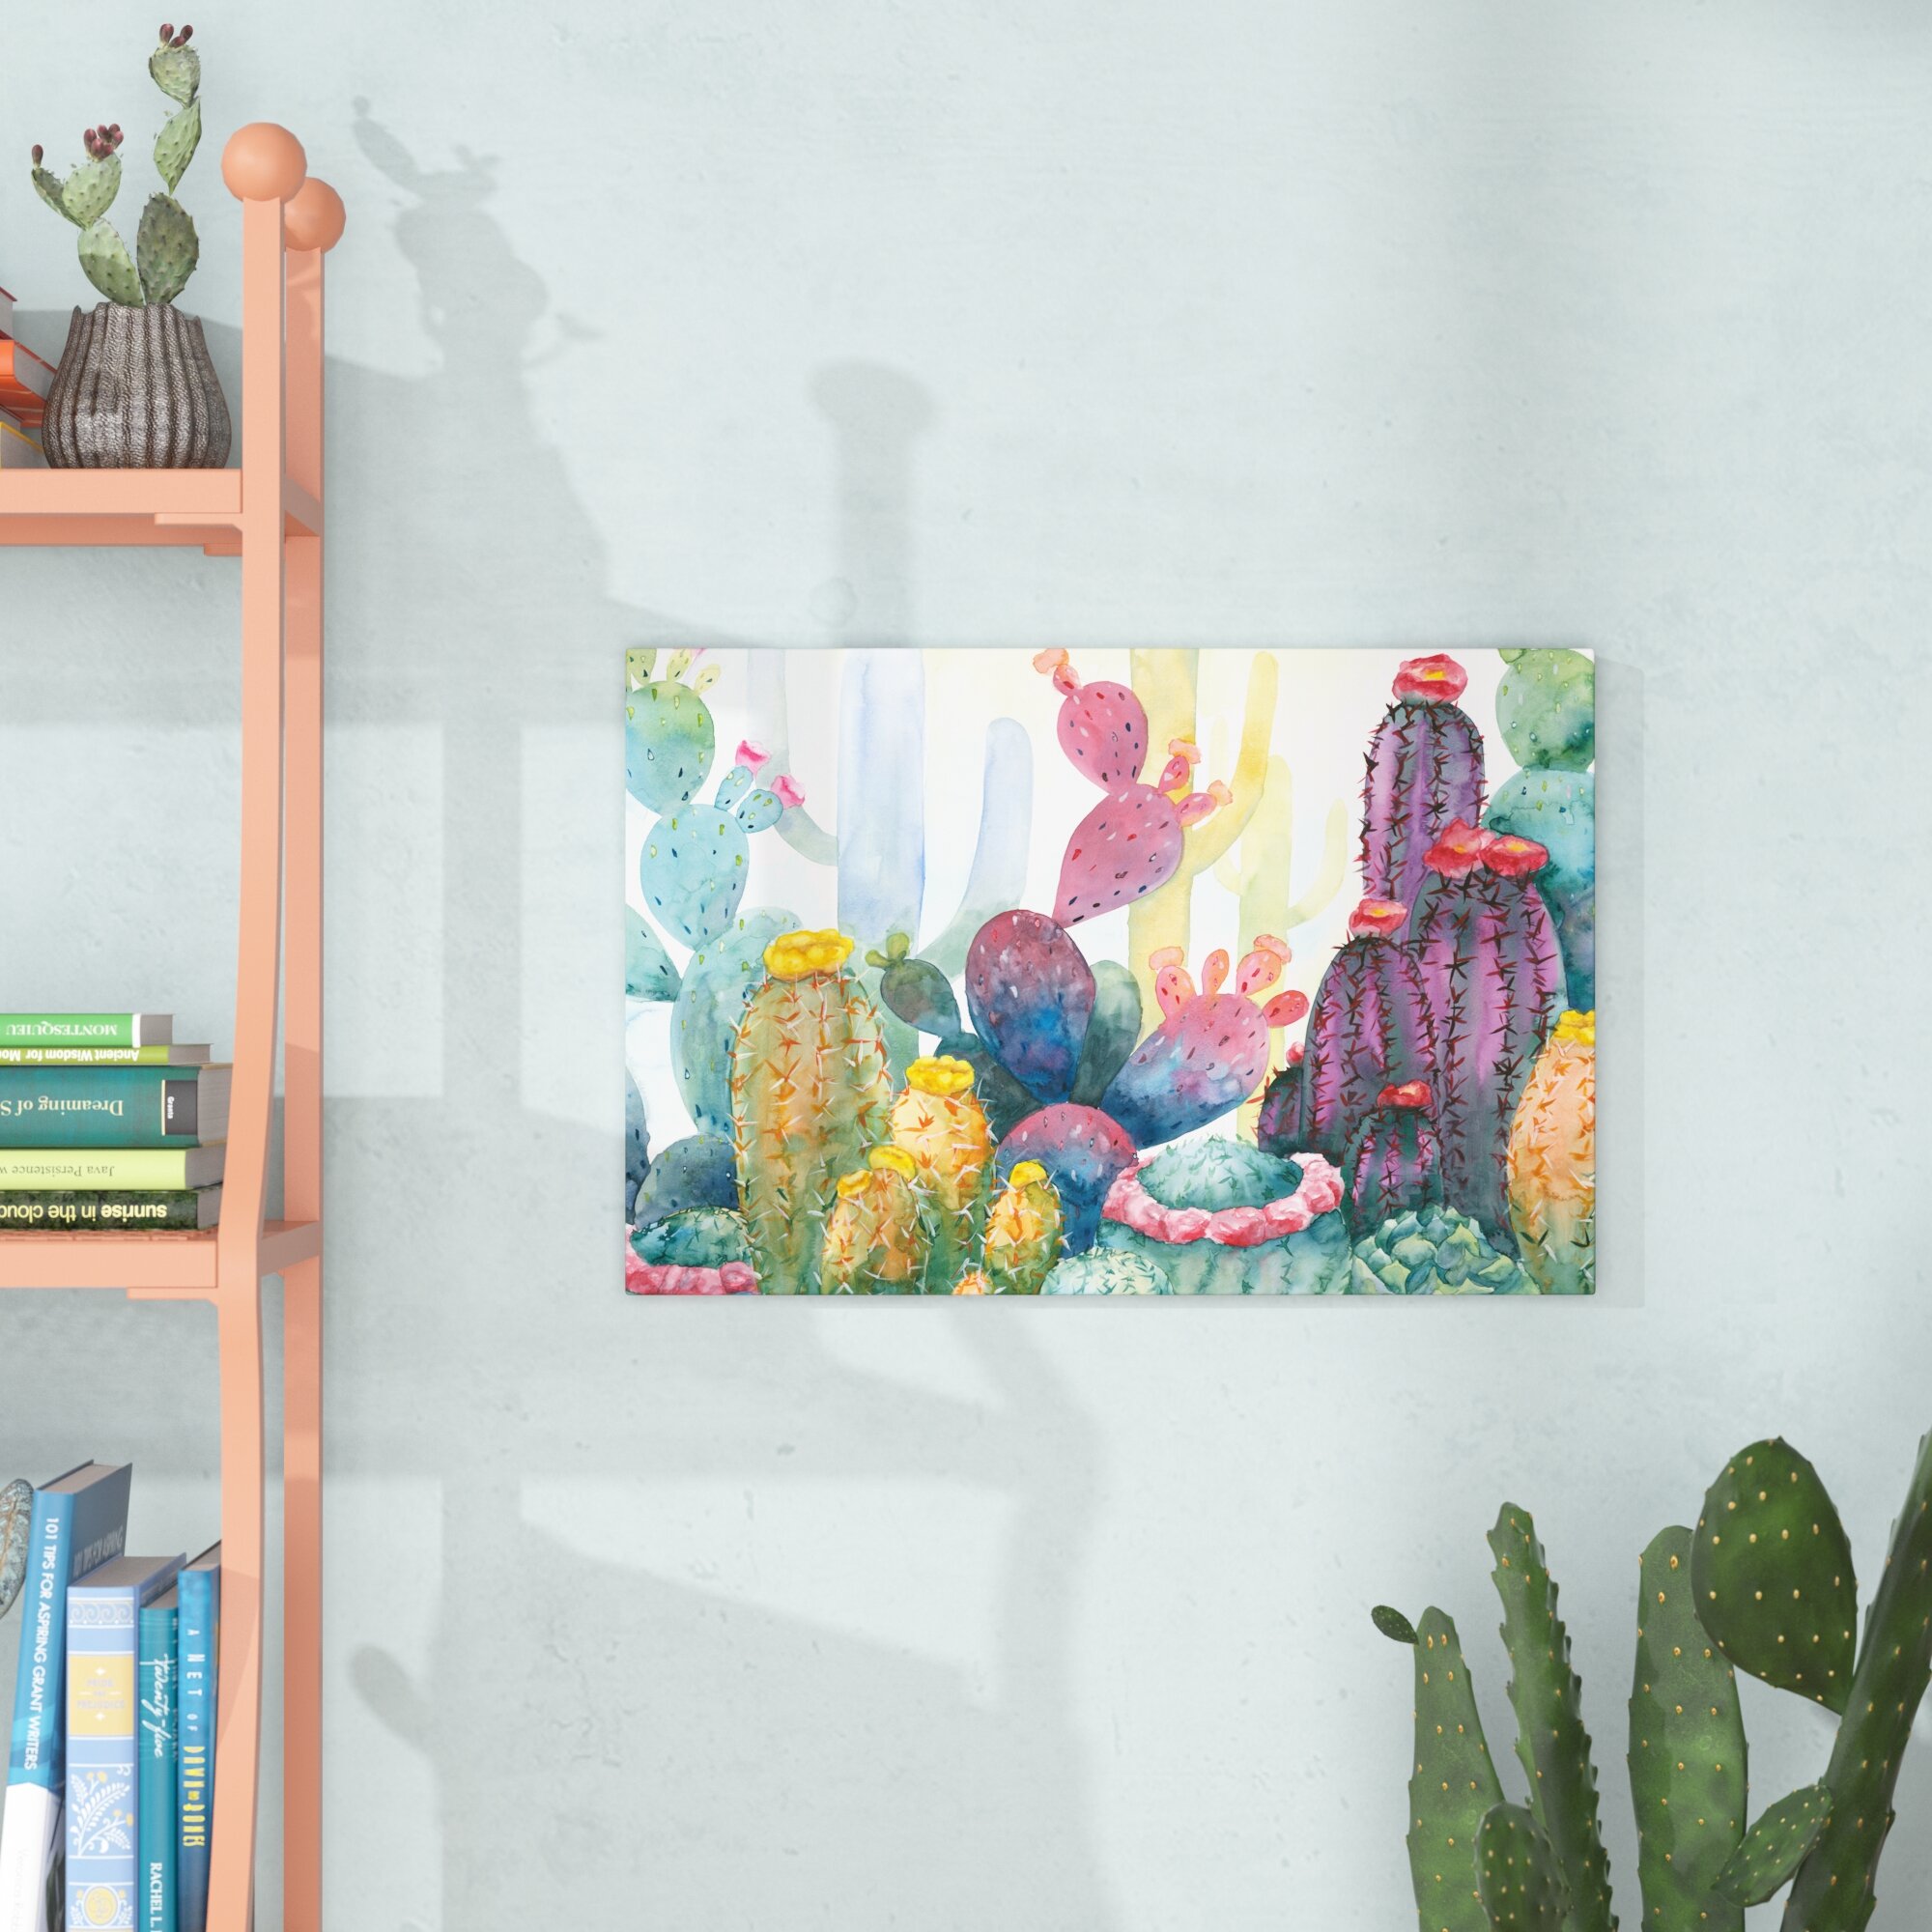 Union Rustic Colorful Blooming Cactus - Print on Canvas & Reviews | Wayfair